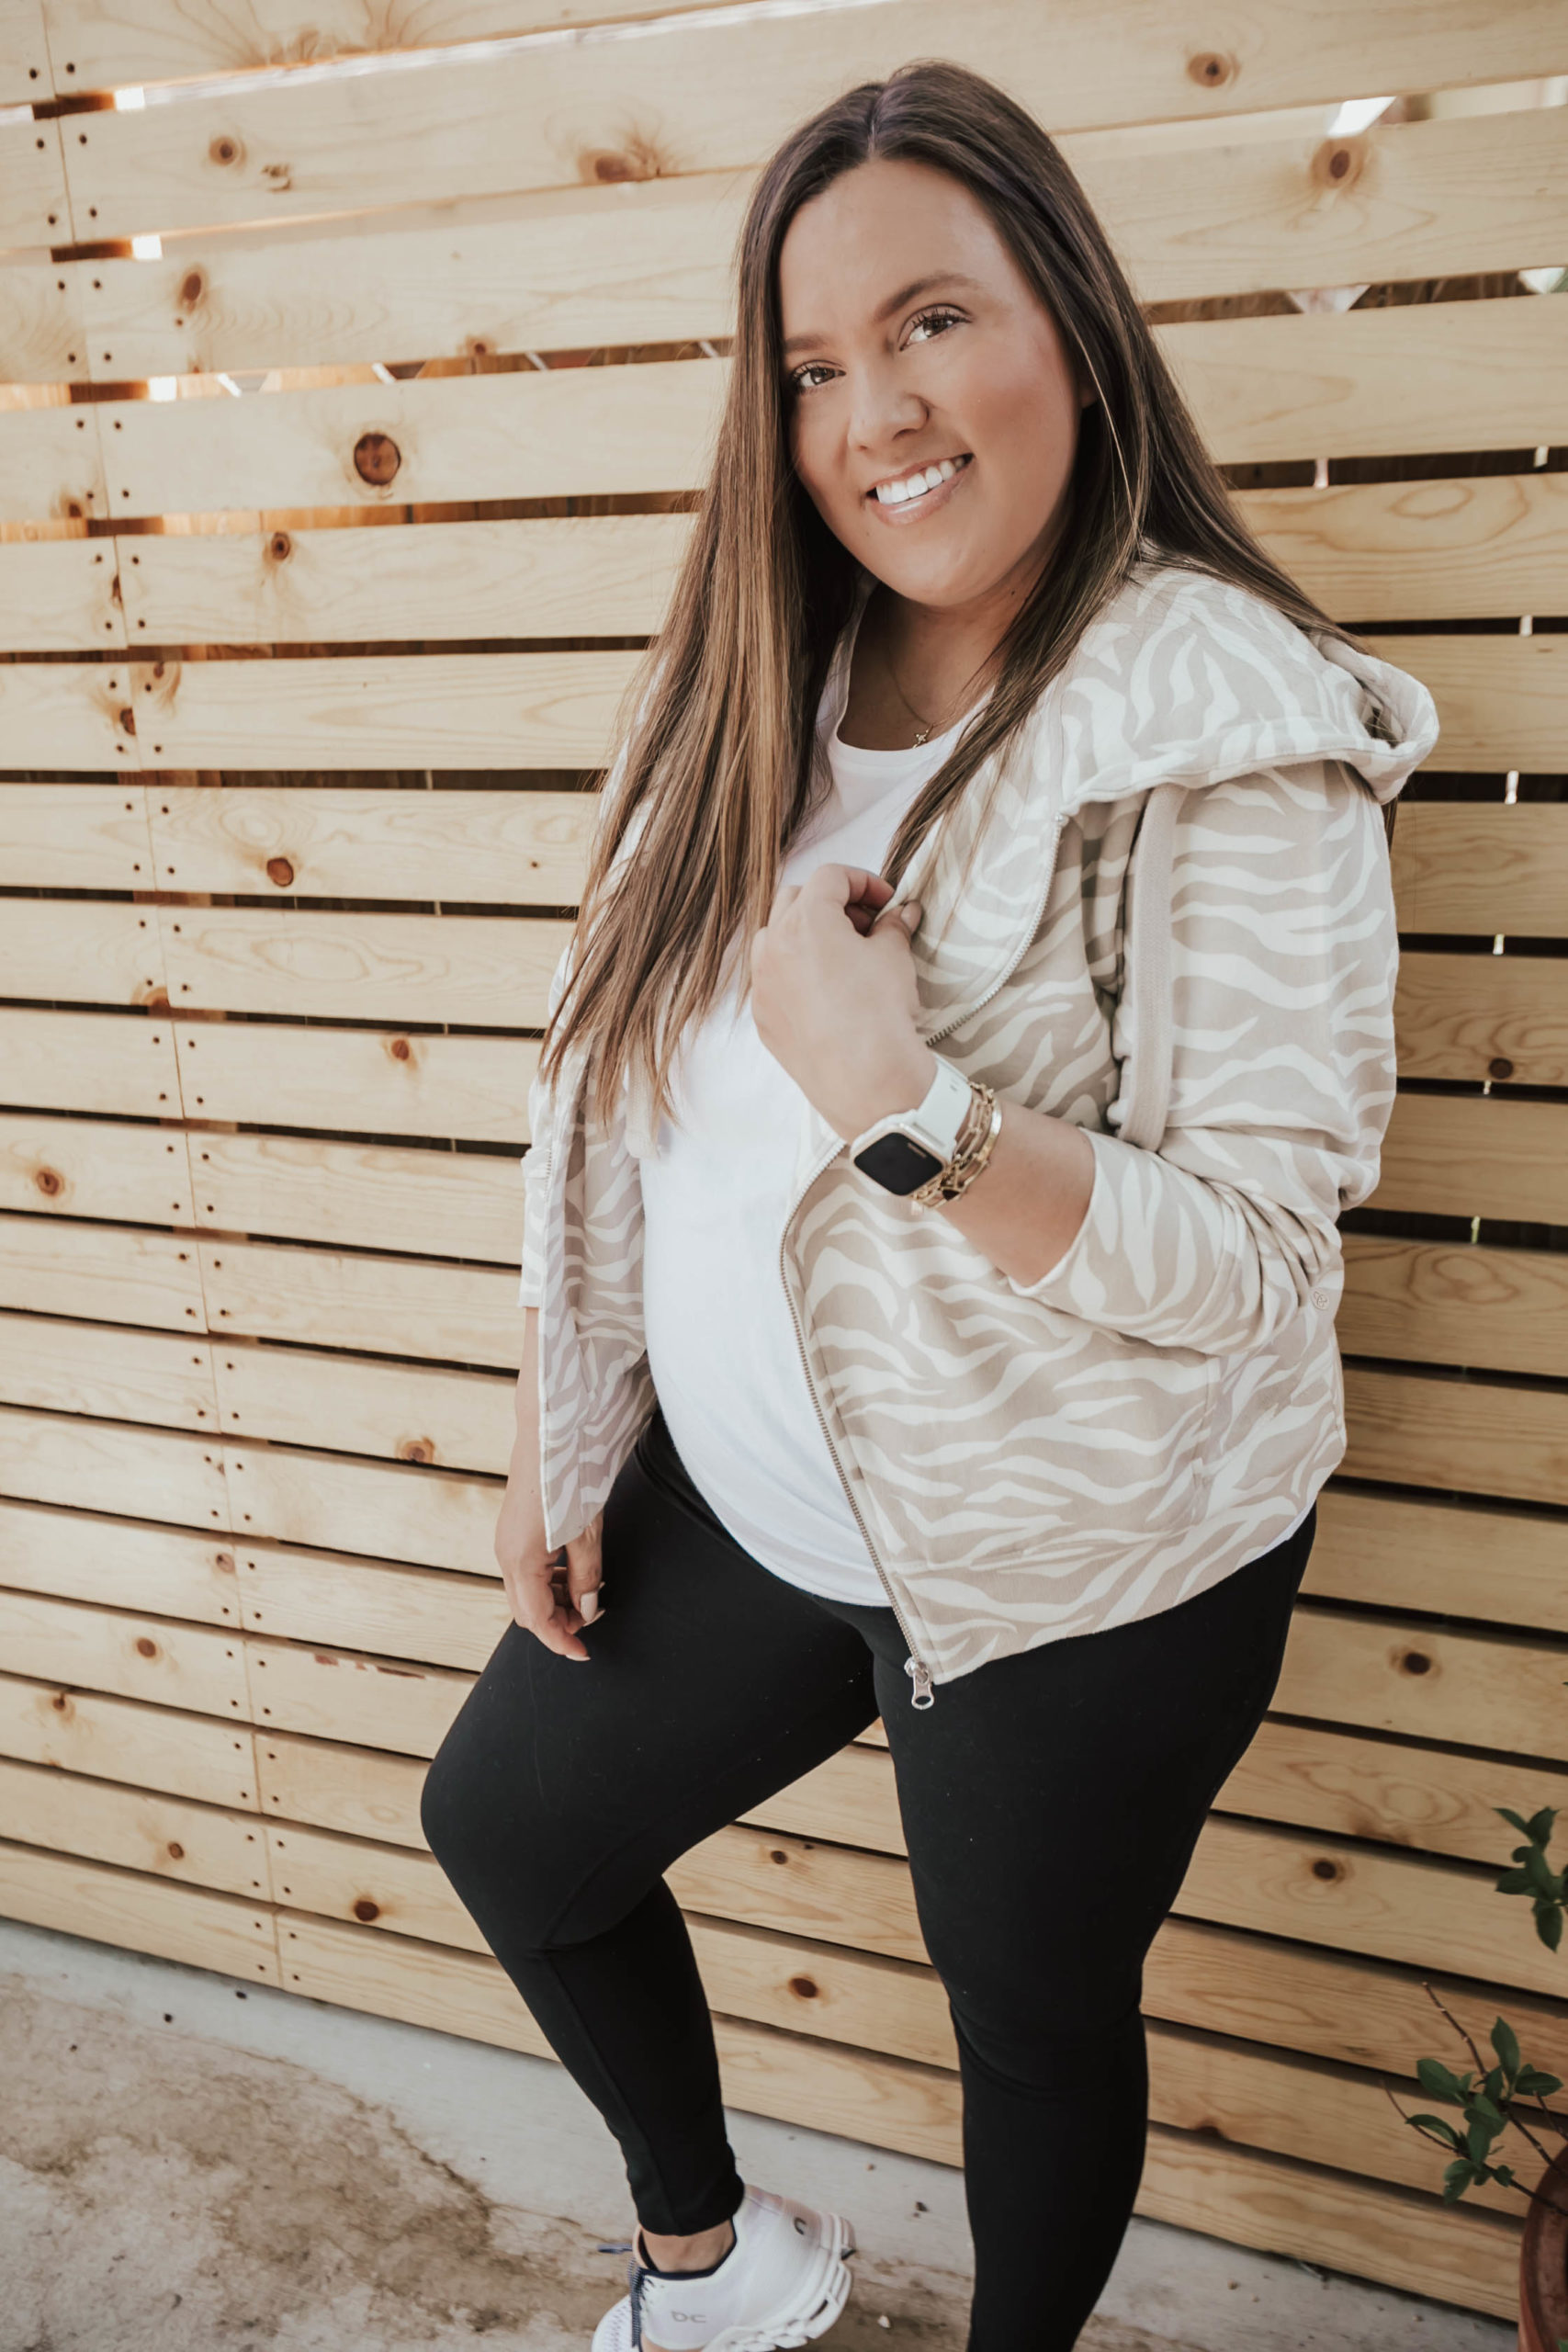 Reno blogger, Ashley Zeal Hurd from The Ashley and Emily blog shares how she is having a healthy pregnancy with Garmin.